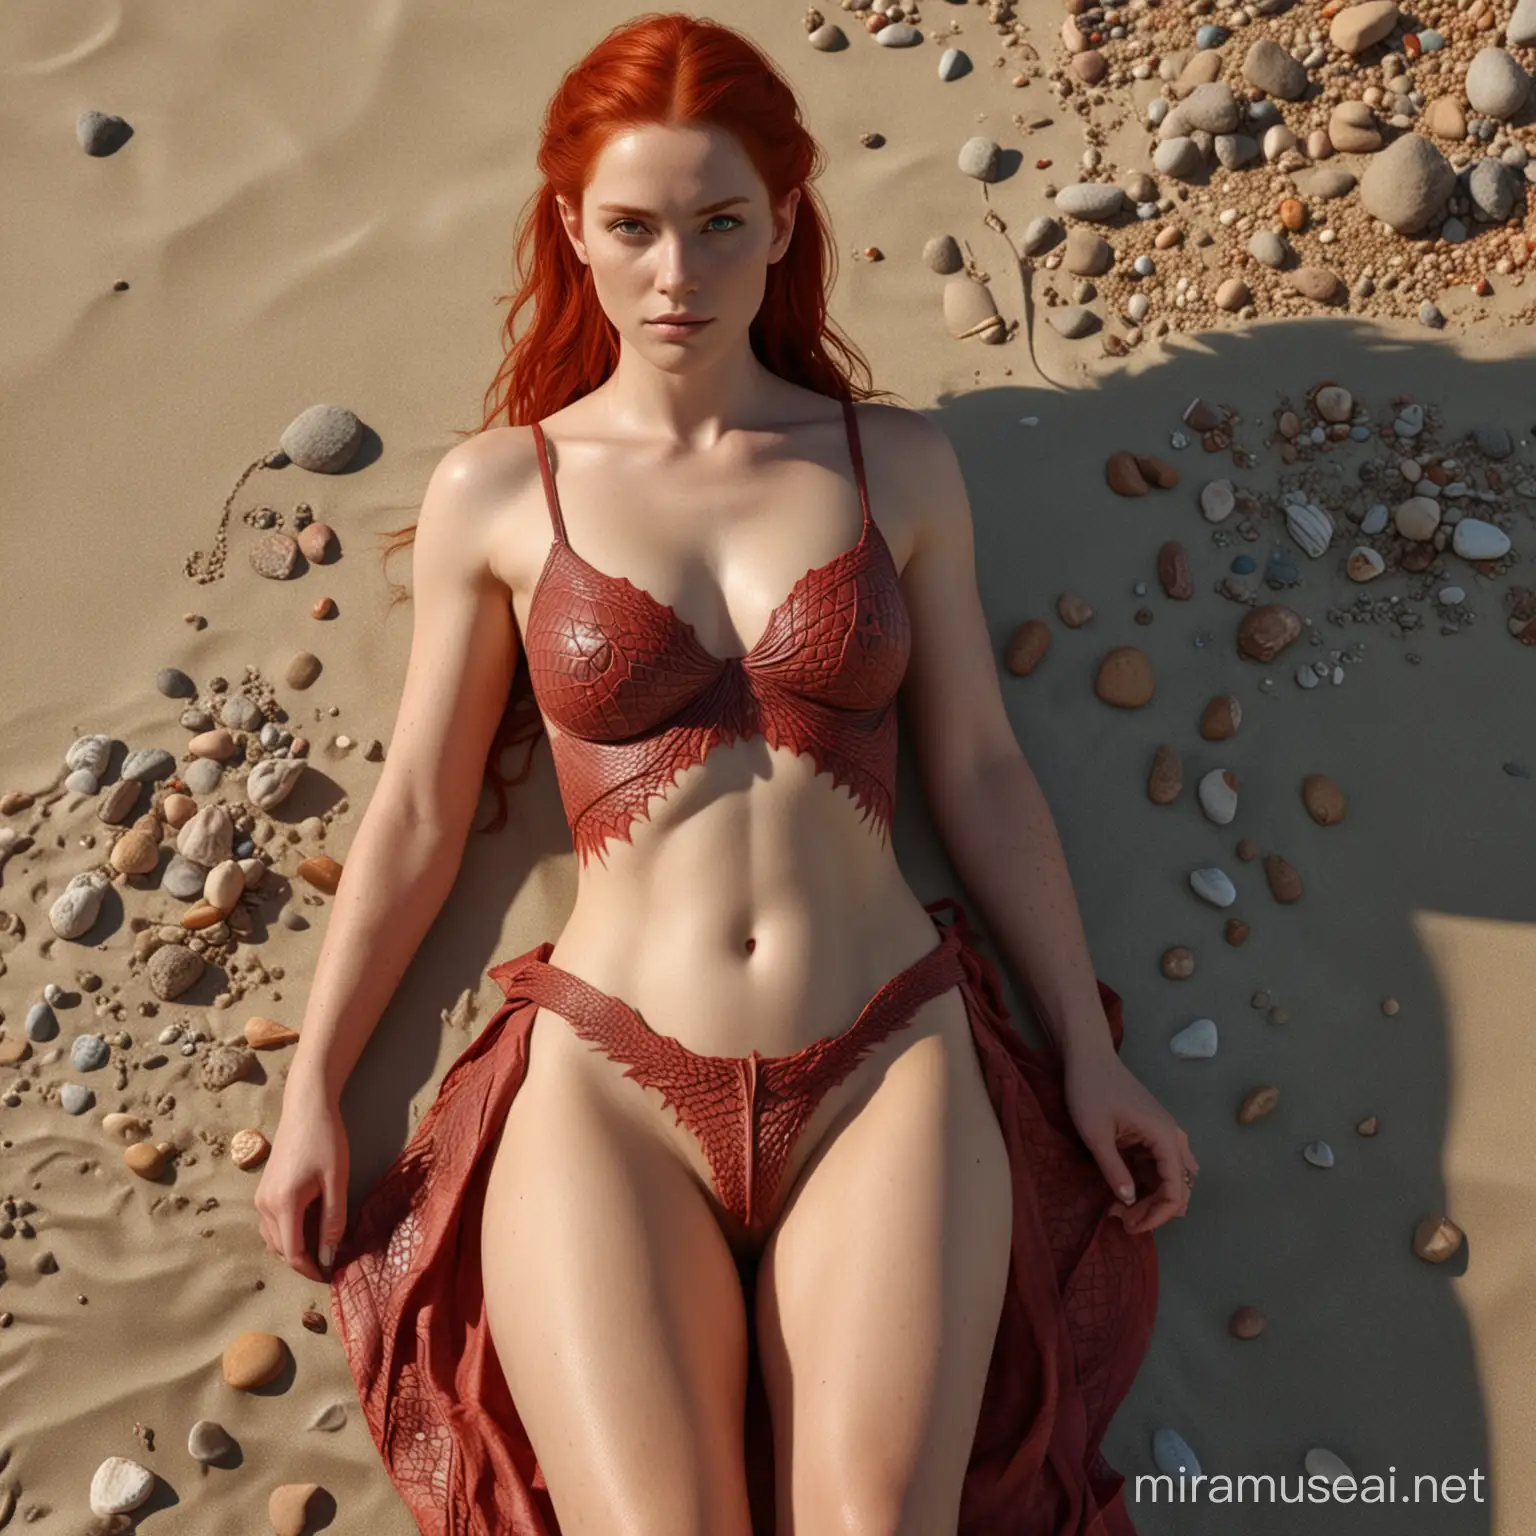 hyperrealistic high detail 4k full body long shot photograph taken from the front left, showing an anatomically correct female human, with red hair, draconic runes carved into the skin on arms, legs and body, dragon-scales are growing on body, sitting at a beach enjoying the sun, she is wearing a sleeveless loose colourful open front top and a loose skirt